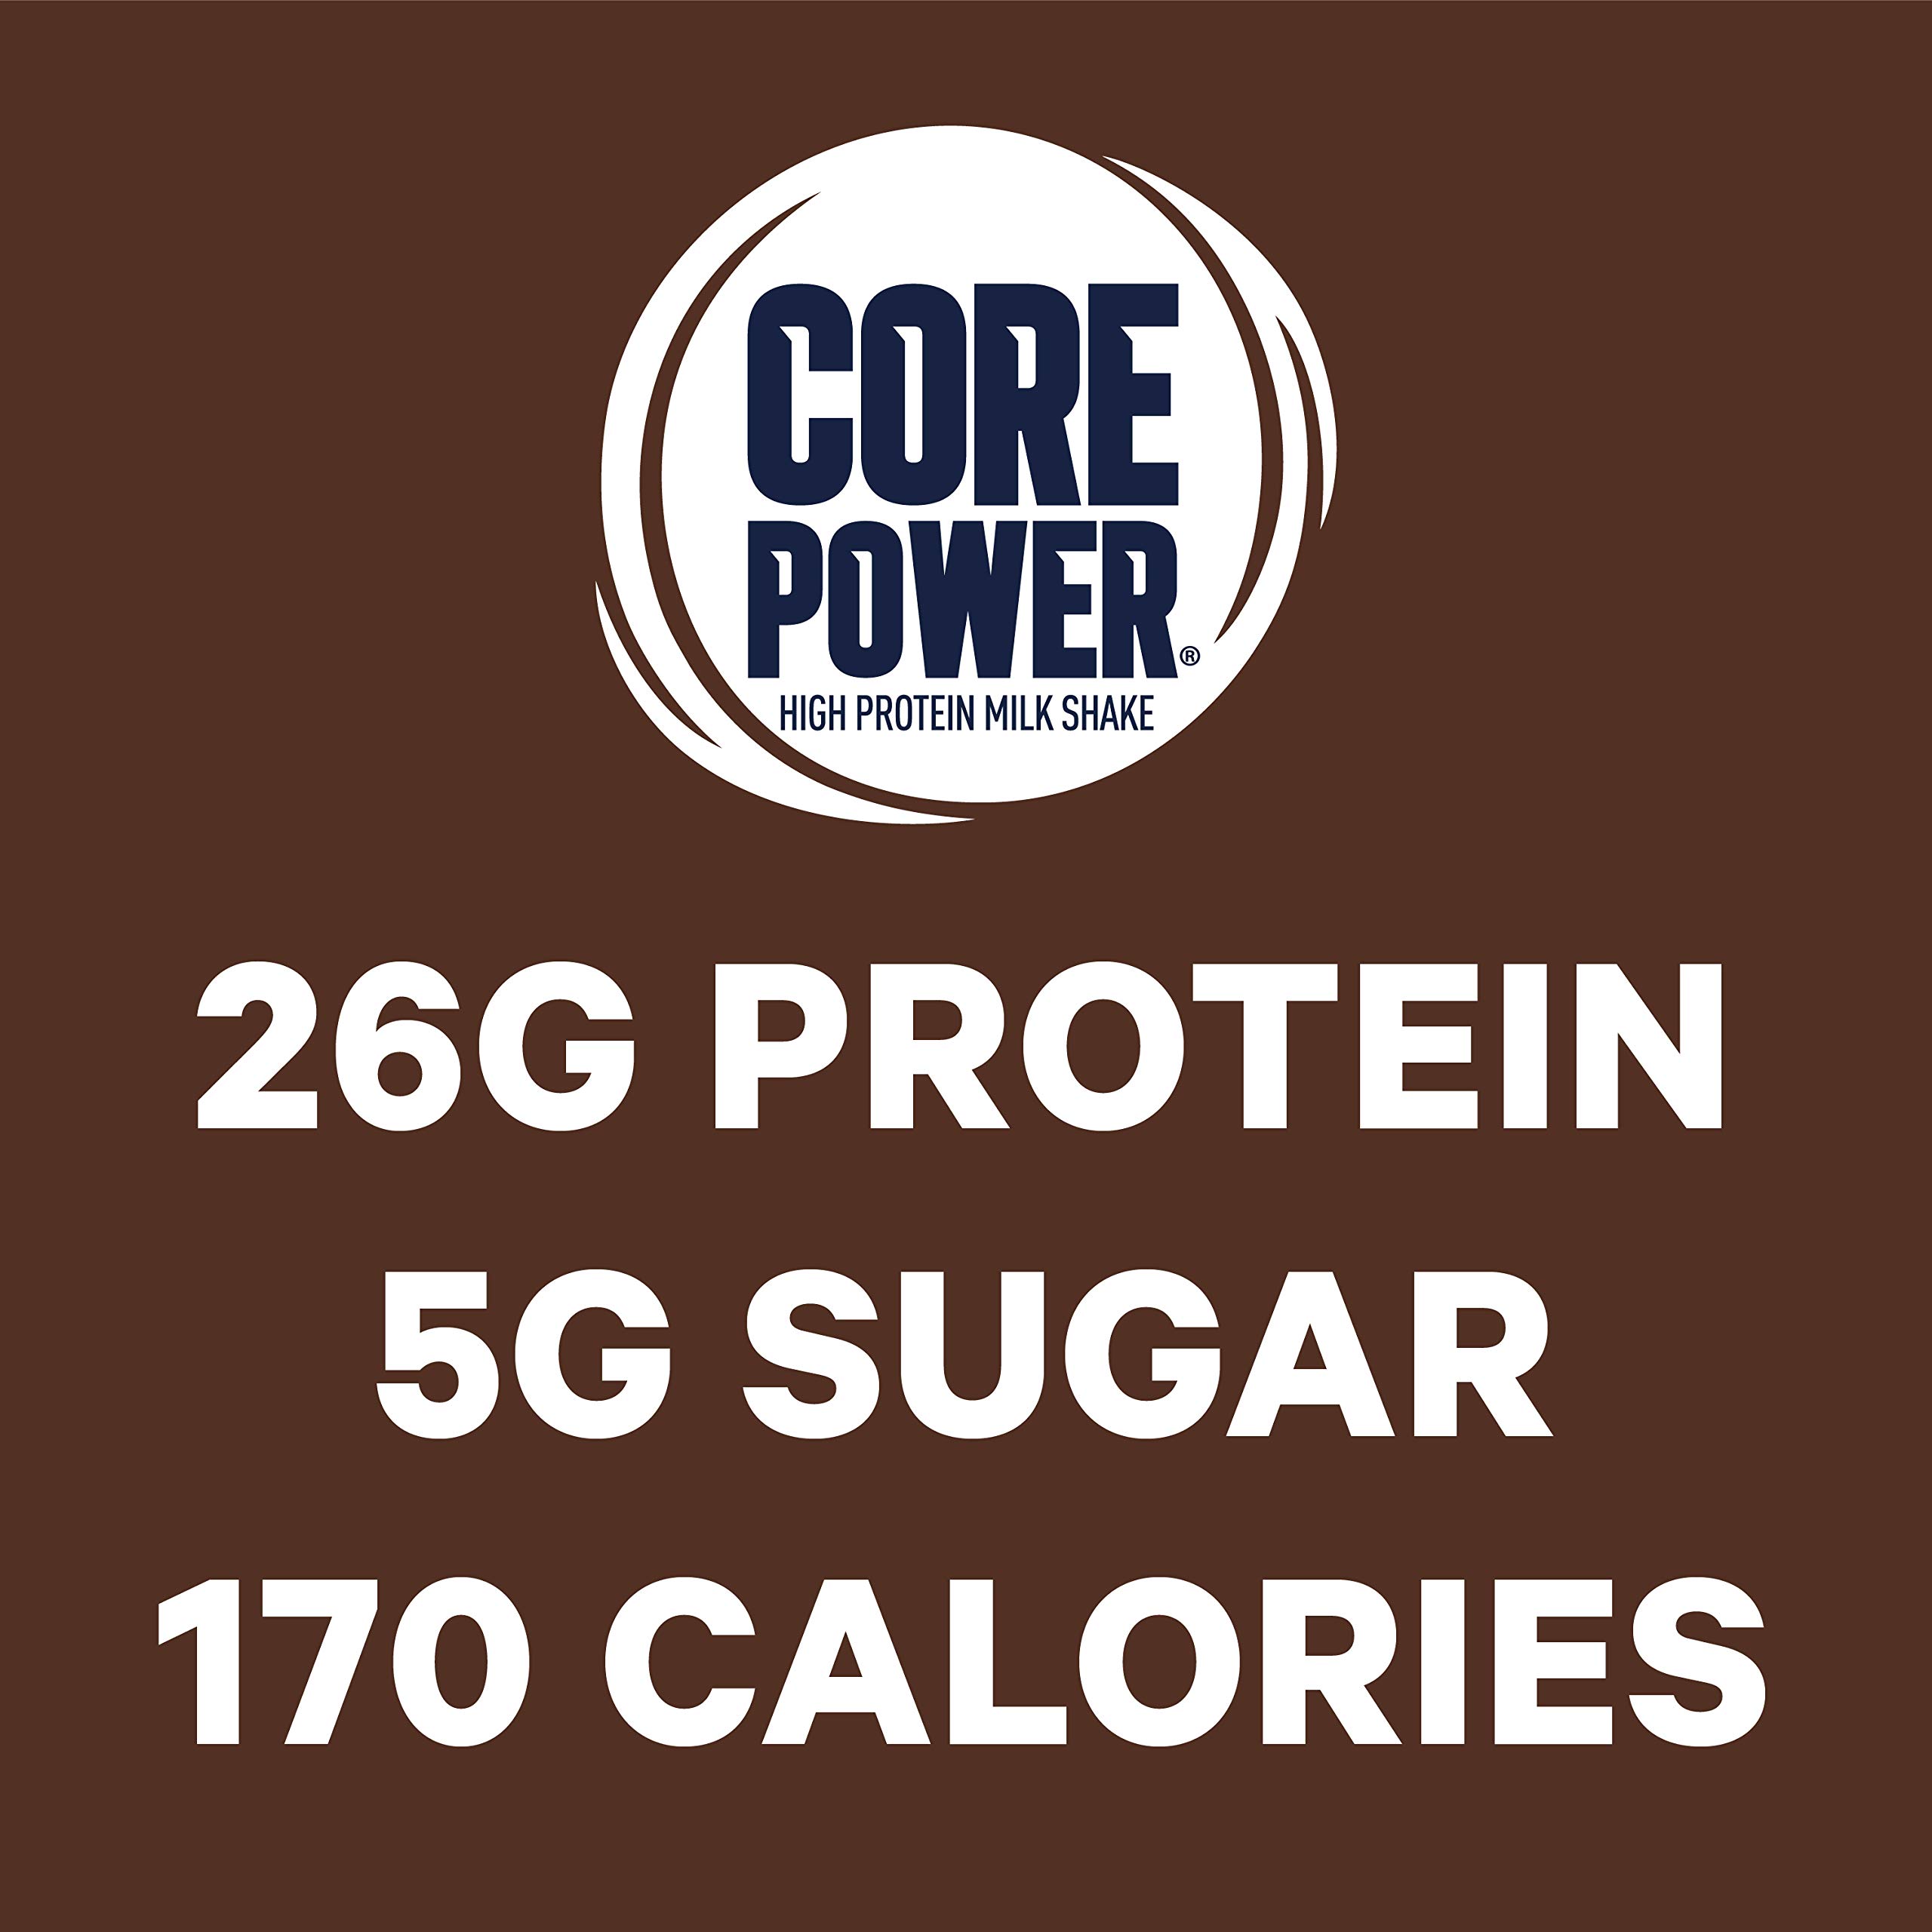 Fairlife Core Power 26g Protein Milk Shakes, Ready To Drink for Workout Recovery, Chocolate, 14 Fl Oz (Pack of 12)